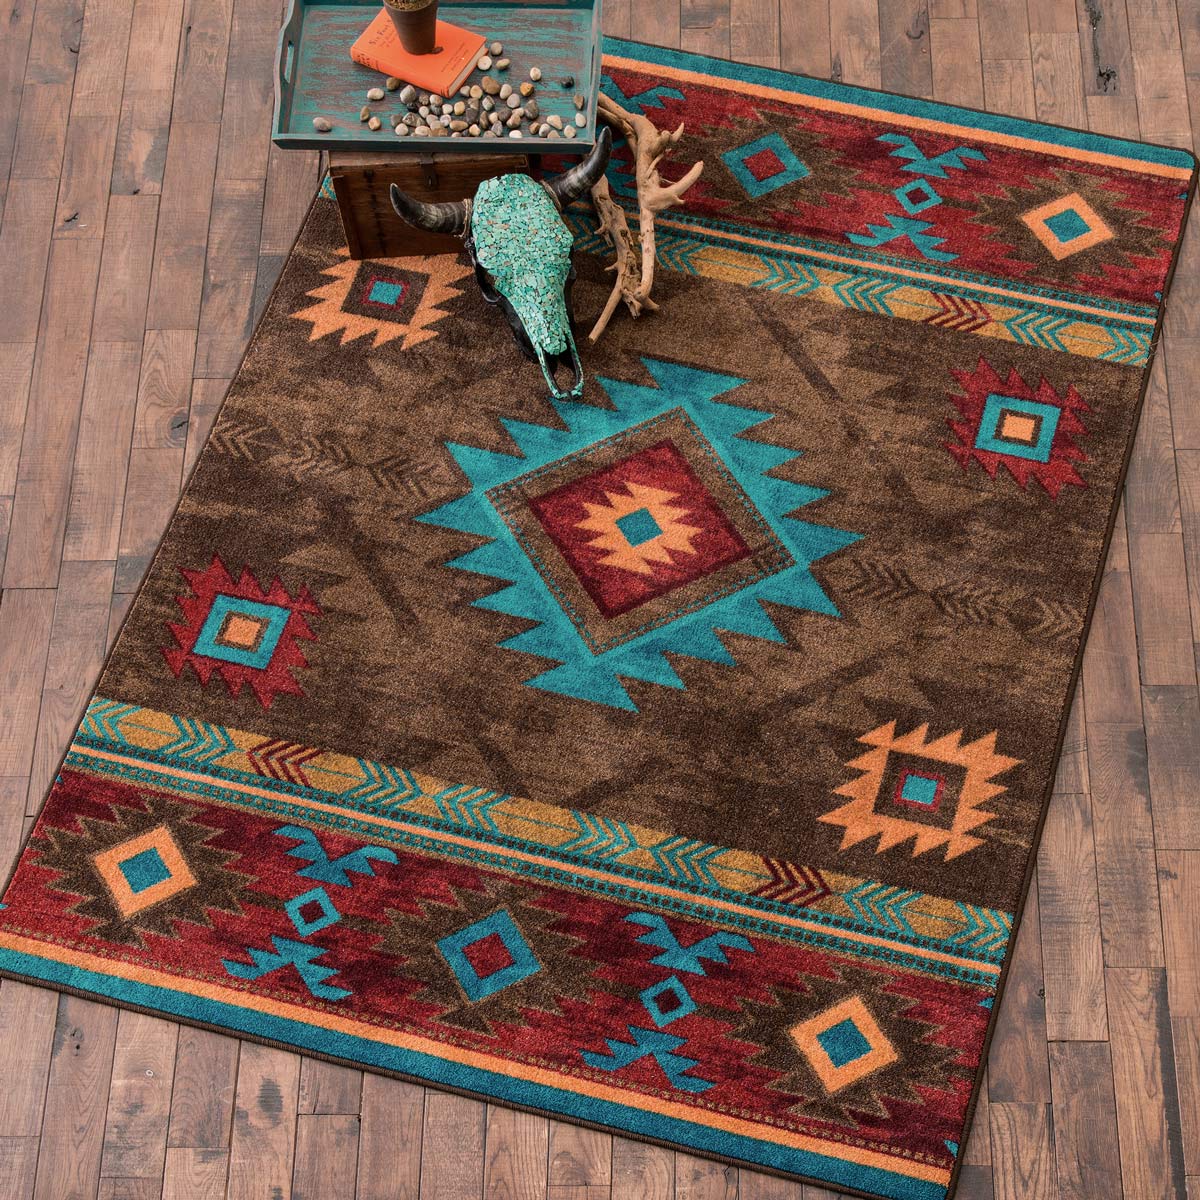 Some information about western rugs